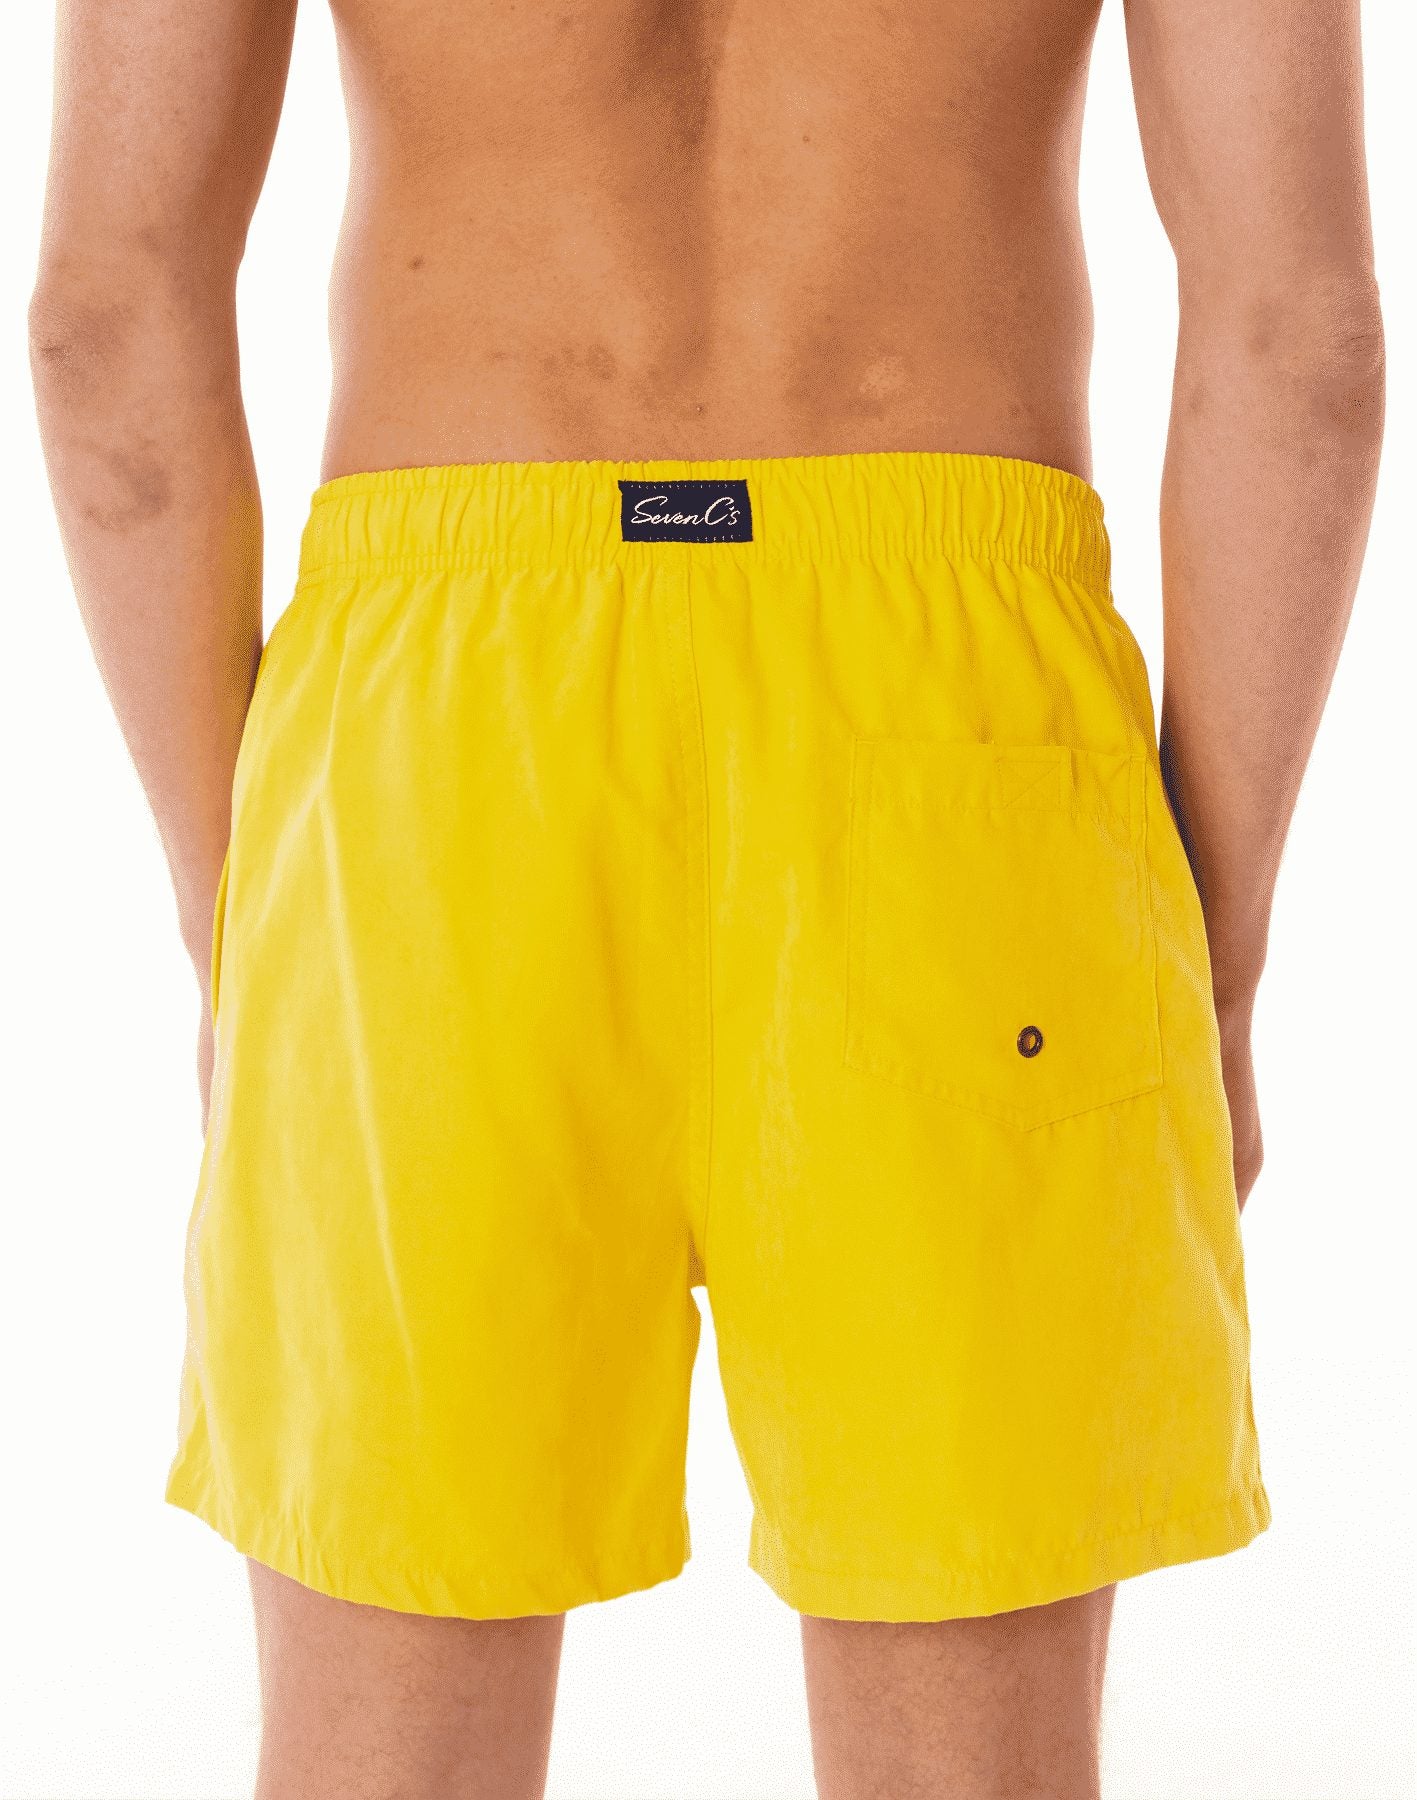 SevenC's Mens' Recycled Polyester Shorts in Yellow - Back View